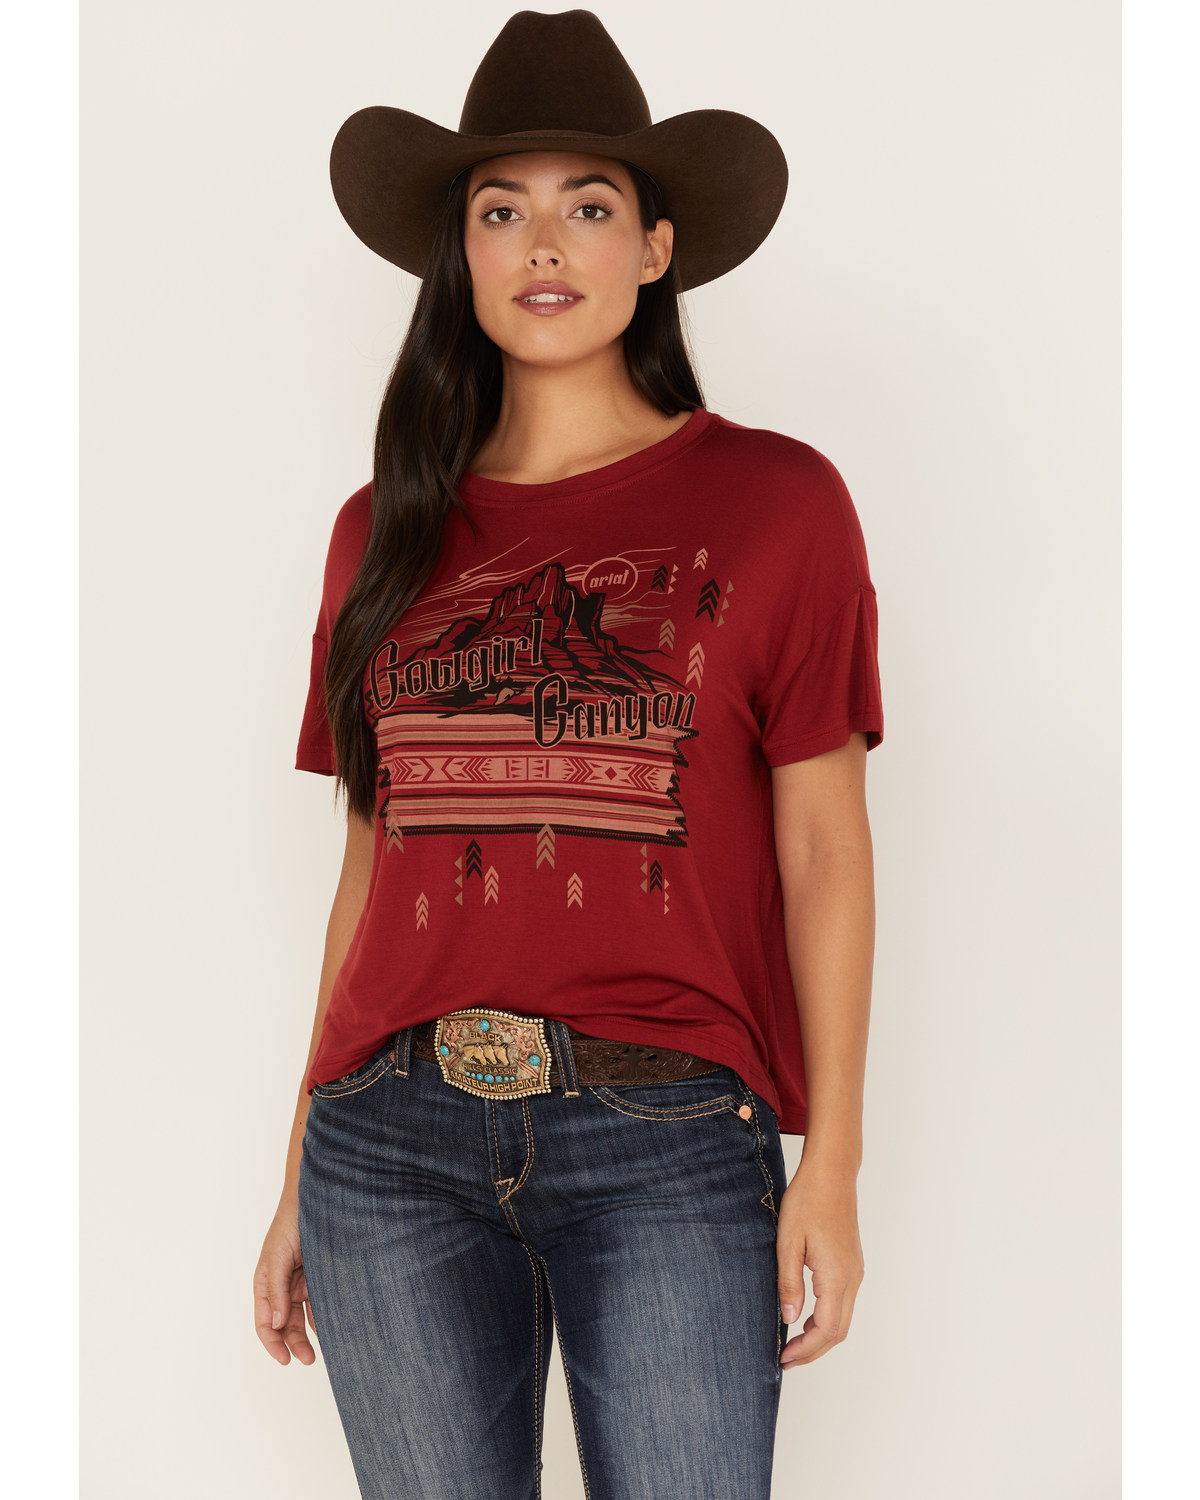 Ariat Women's Cowgirl Canyon Southwestern Graphic Tee